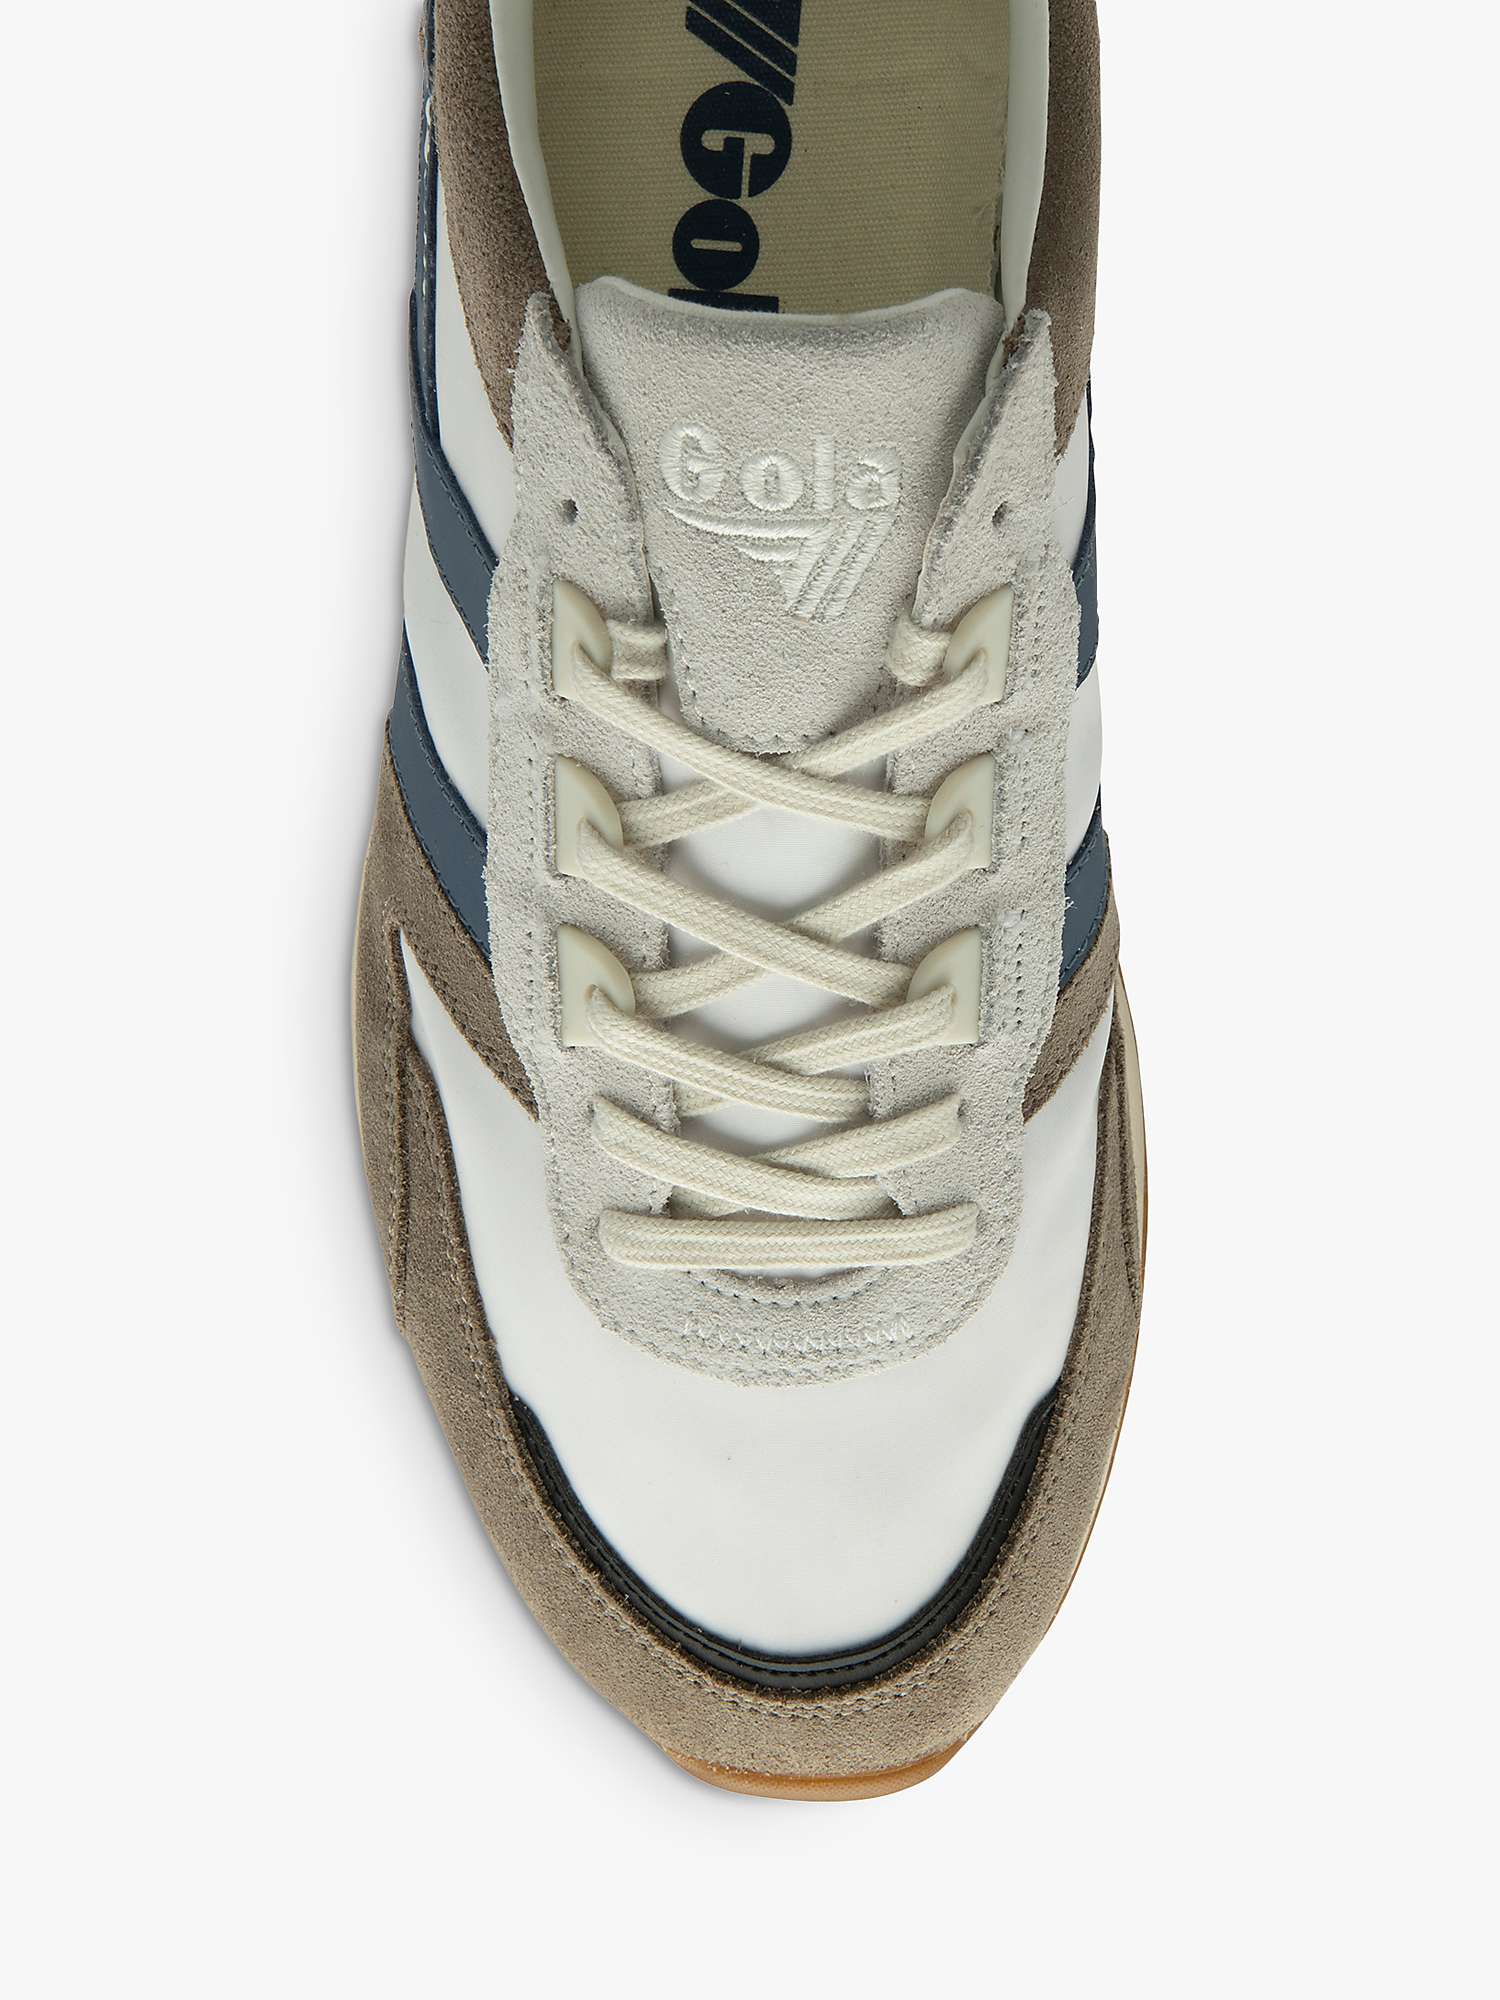 Buy Gola Classics Chicago Nylon Lace-Up Trainers Online at johnlewis.com